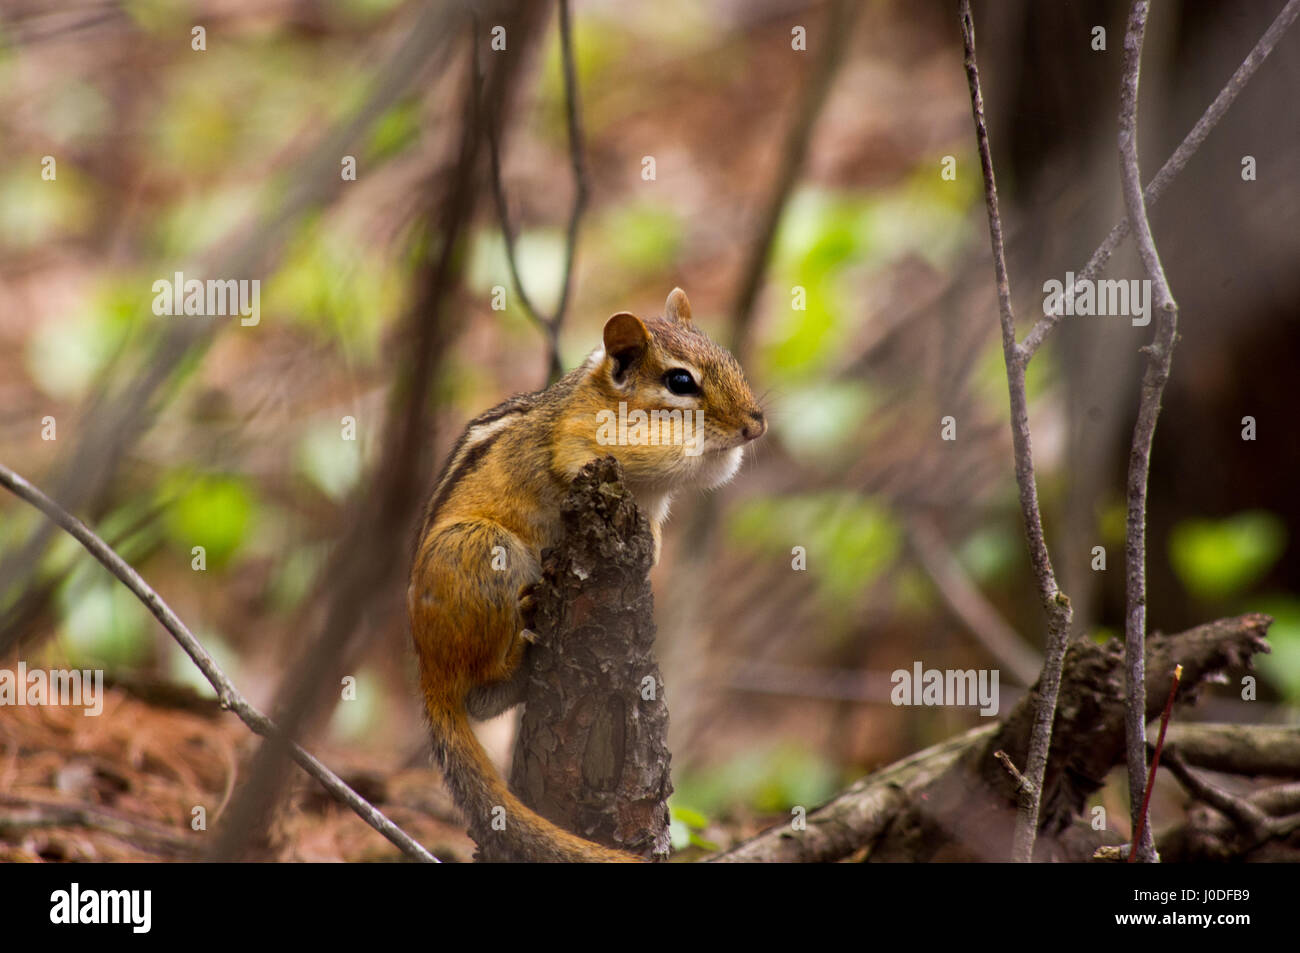 Small Chipmunk perched on stump in a forest setting. Stock Photo